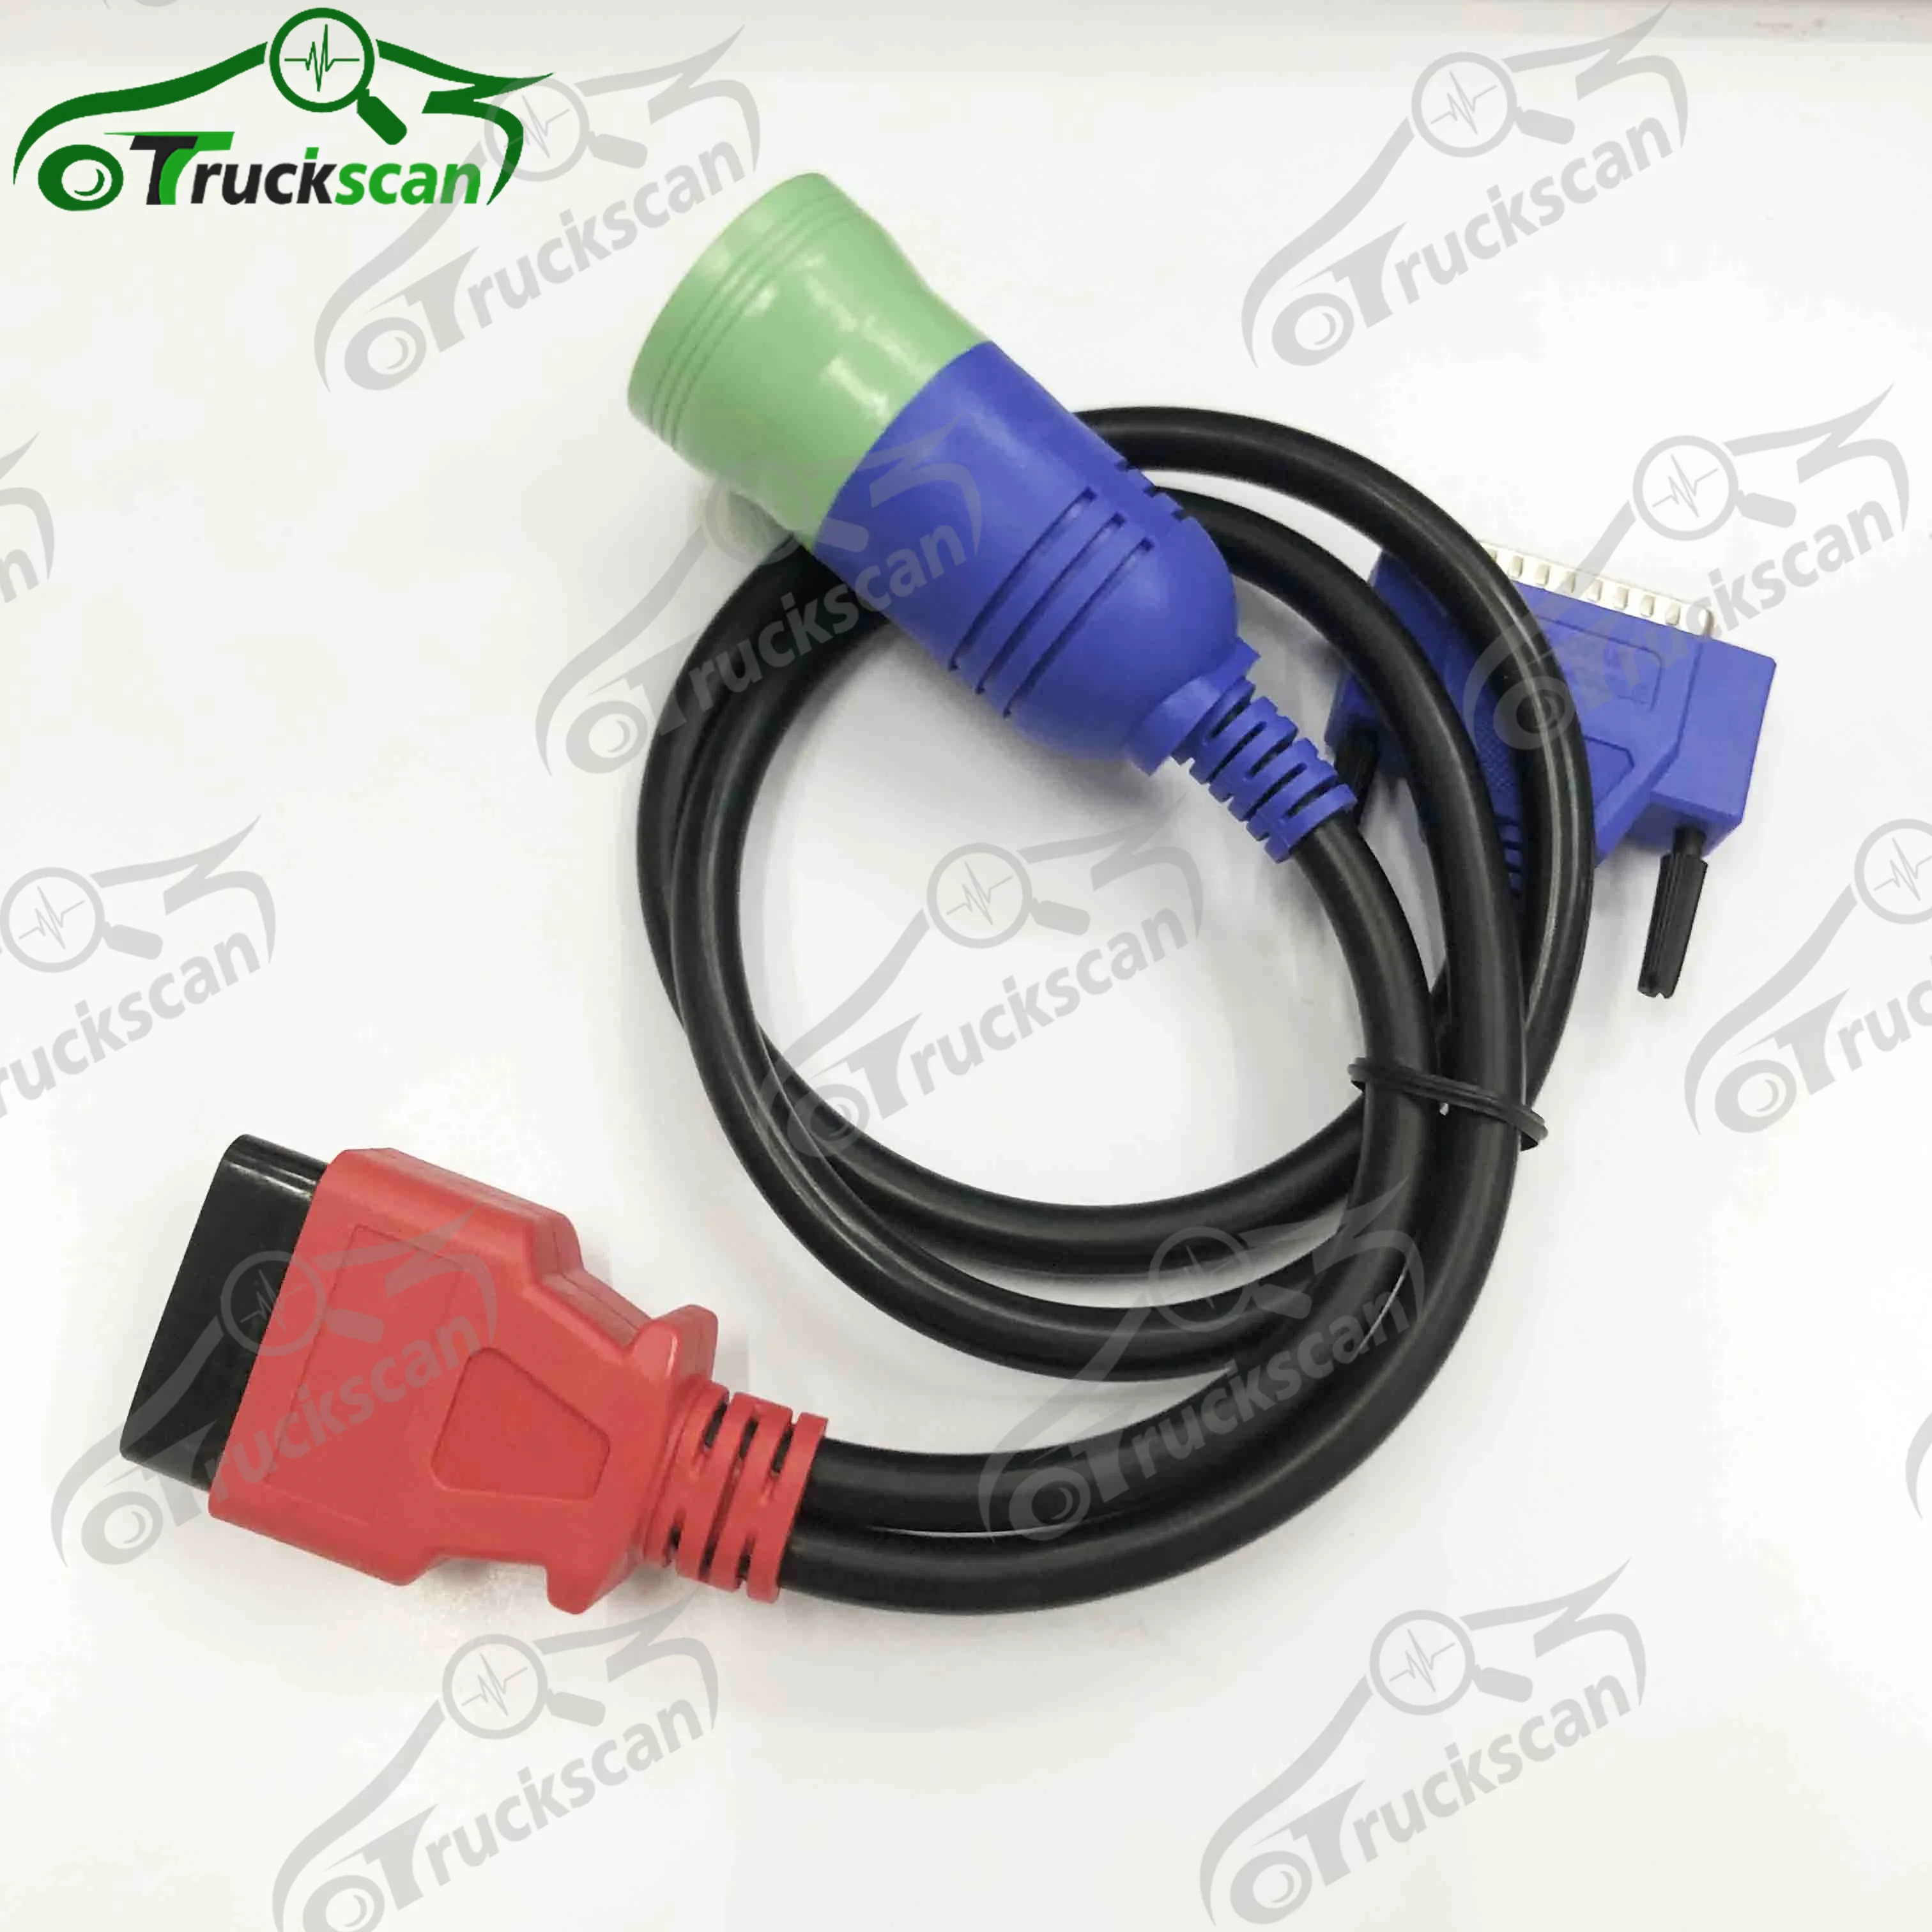 

9pin to 16 pin OBDII Cable Tool Heavy Duty Truck Diagnostic Part OBD2 obdii obd ii Connection cable